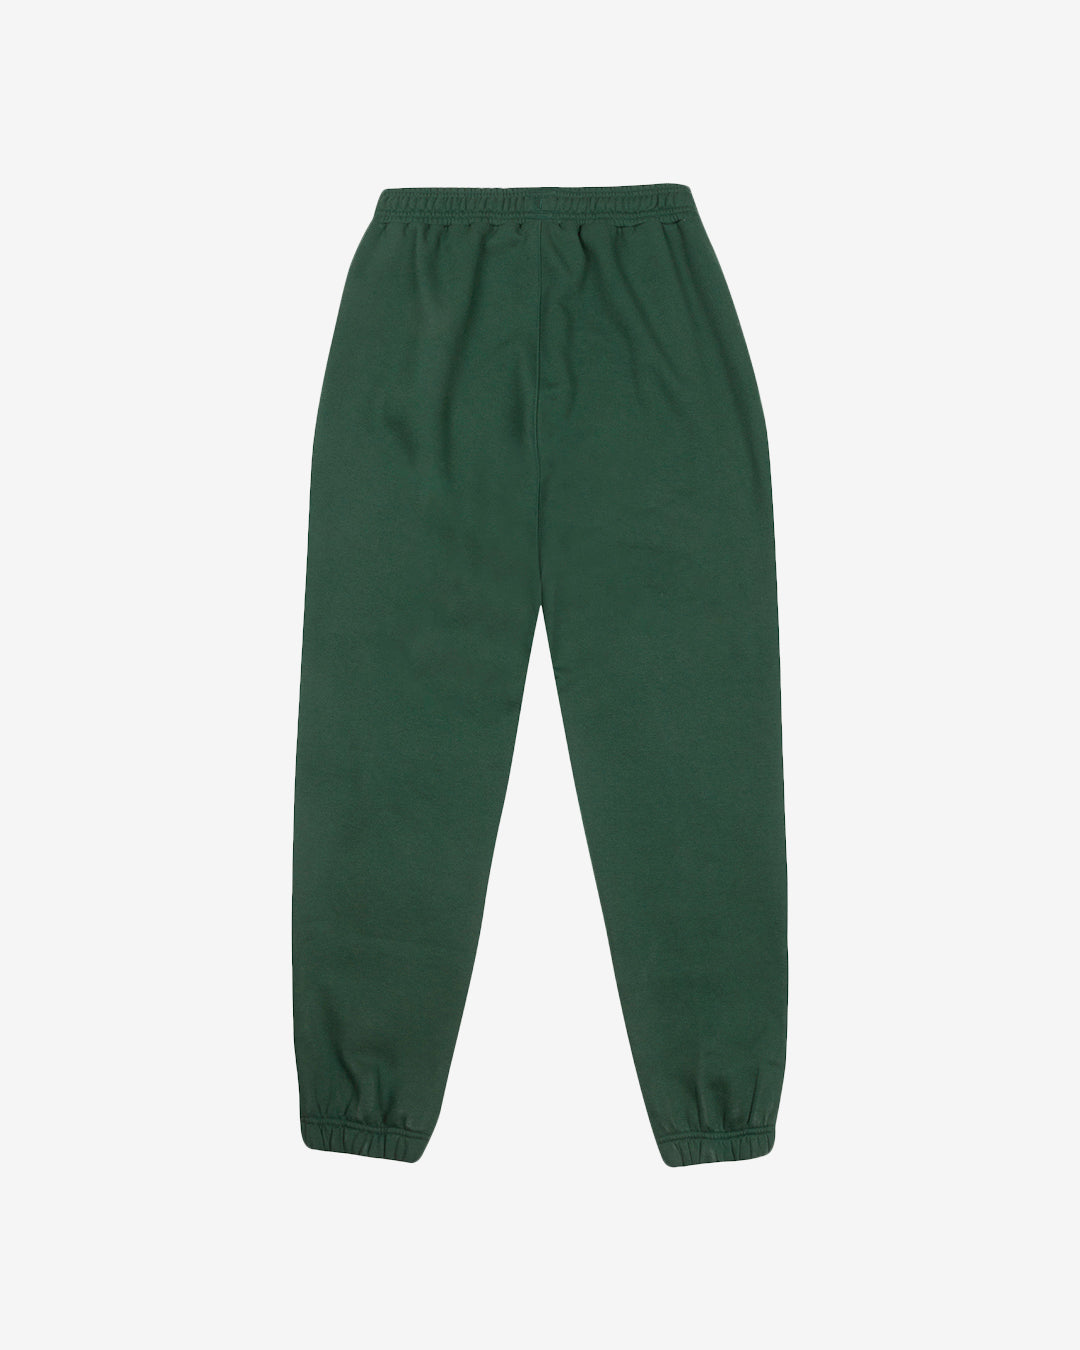 PFC: 002-4 - Mens Sweatpants - Forest Green